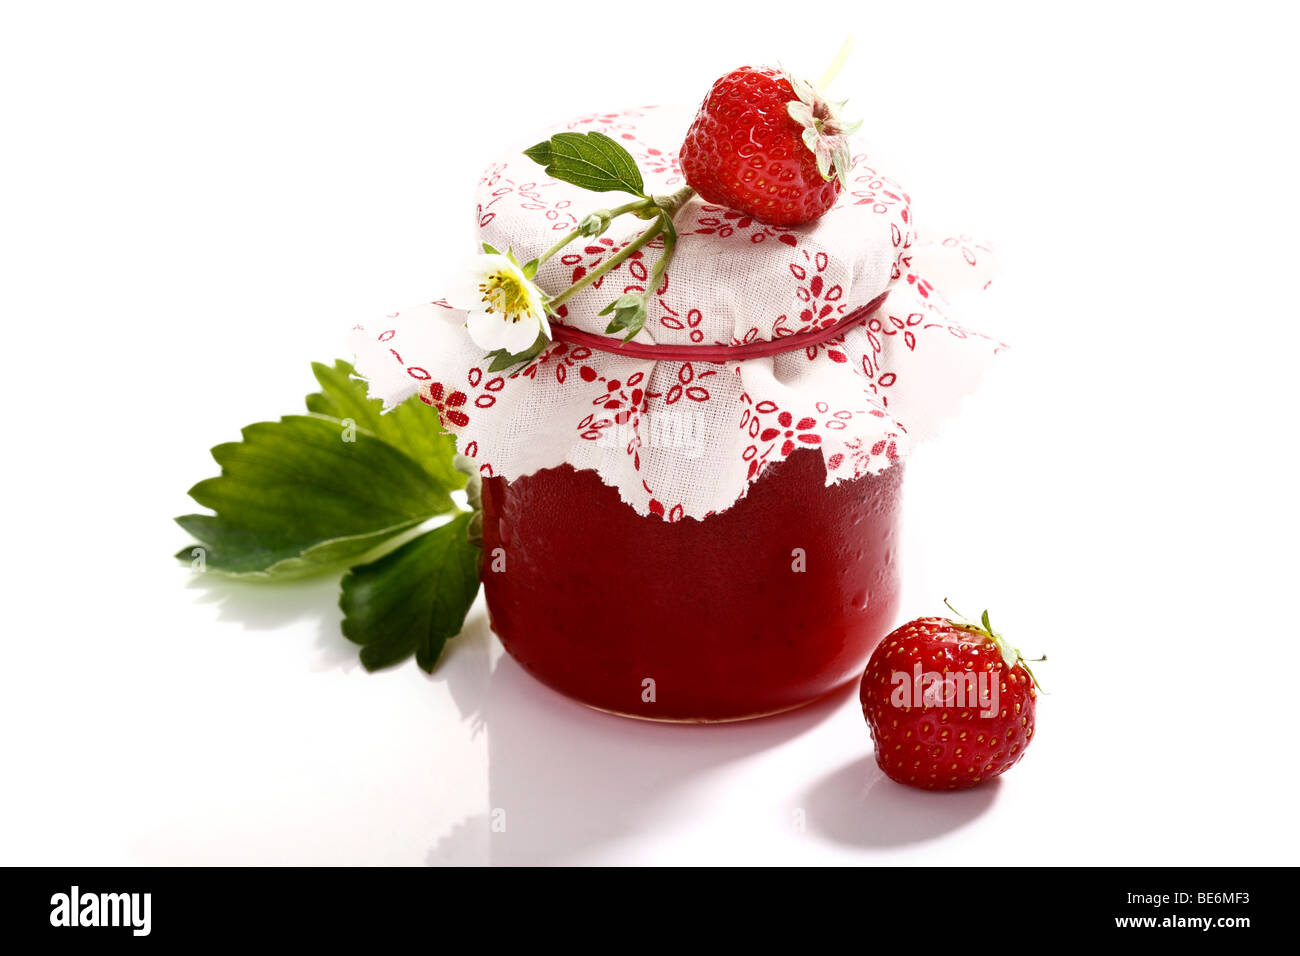 Strawberry jam in a glass Stock Photo